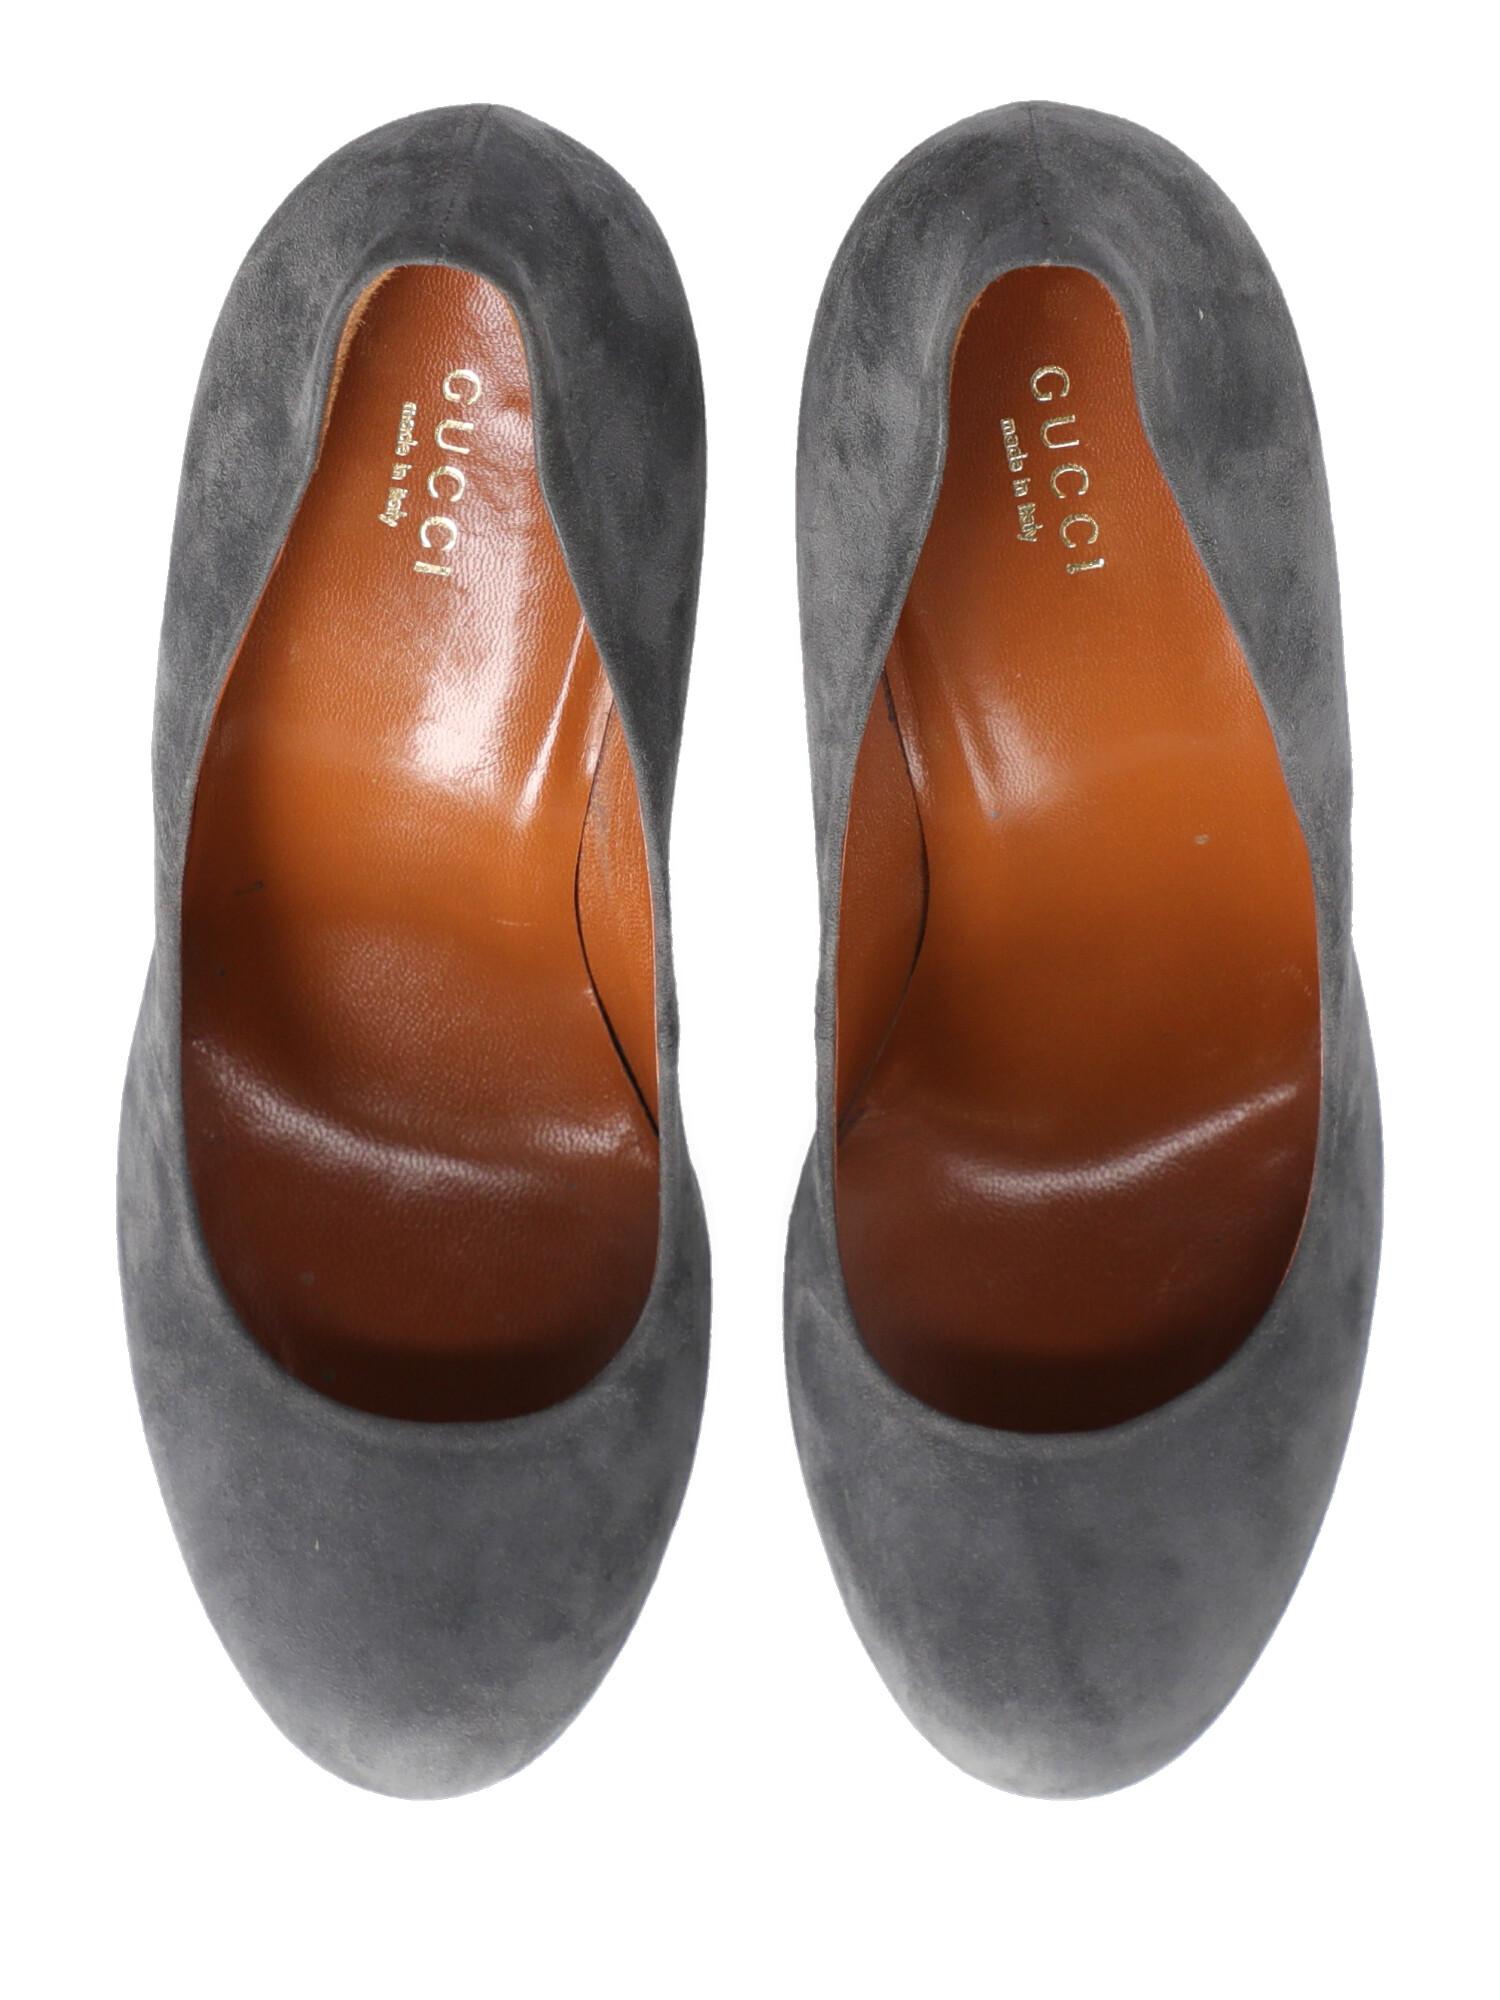 Gucci Woman Pumps Grey Leather IT 39.5 1